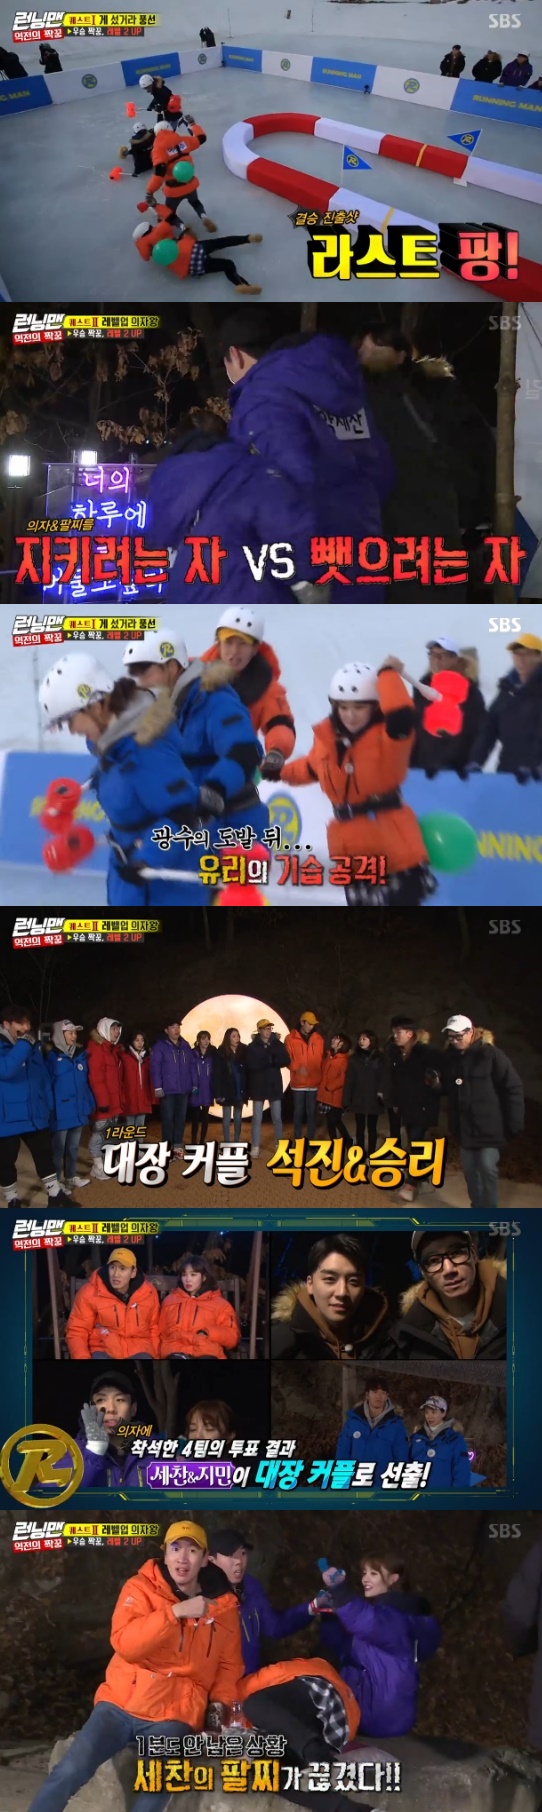 Running Man Kim Jong-kook & Song Ji-hyo won the level-up race.On SBS Good Sunday - Running Man broadcasted on the 27th, Haha was surprised by Minahs unique character.Lee Yoo-ri, Jung Yu-mi, Seungri, AOA Minah, Jimin and Hong Jong-Hyun appeared as guests on the day.The guests were attached to the level 1 to 6 in the costume, and when it was confirmed that the level of Jung Yu-mi was 6, the low-level members flocked to Jung Yu-mi.As a result of the selection of the pair, Yoo Jae-Suk & Jung Yu-mi, Haha & Minah, Yang Se-chan & Jimin, Jeon So-min & Hong Jong-Hyun, Ji Suk-jin & Victory, Lee Kwang-soo & Lee Yoo-ri were paired.This race is a level-up final couple race, with a total of two confrontations: the first-place couple in each round wins level two and the second-place couple wins level one; and the second-placed couple wins when level 10.However, if there is no level 10 until the end of the mission, the final winner determines the final roulette.The first couple The Quest was Big Bang, Balloon, and they had to burst the couples balloon. Everyone was exhausted.Lee Kwang-soo & Lee Yoo-ri won the final by winning Kim Jong-kook & Song Ji-hyo.Lee Kwang-soo, who finished first, laughed at level 2 at level 0.Kim Jong-kook & Song Ji-hyo, who finished second, was able to raise level 1, and Kim Jong-kook conceded to Song Ji-hyo.The last of the questions is a level-up chair king. A couple chair takeaway confrontation. You can find a doctor scattered within the time limit and sit down.However, after each round, the surviving couple elected the captain by voting, and the captain was able to drop a couple.In the first round, Jeon So-min & Hong Jong-Hyun aimed at Yang Se-chan & Jimin, who was sitting in the chair first, but could not break the bracelet of the two.Jeon So-min went looking for other mates and sat down at the table of Yoo Jae-Suk & Jung Yu-mi, whose bracelets were cut off.Yoo Jae-Suk & Jung Yu-mi headed to Ji Suk-jin & victory, but failed to break the bracelet and was eliminated.The first round captain couple eliminated Ji Suk-jin & victory, and Jeon So-min & Hong Jong-Hyun.In the second round, Lee Kwang-soo & Lee Yoo-ri broke Haha & Minahs bracelet with one minute left.The captain couple Yang Se-chan & Jimin eliminated Kim Jong-kook & Song Ji-hyo.The final results were Lee Kwang-soo & Lee Yoo-ri and Ji Suk-jin & victory, respectively.Because there are no members who have achieved Level 10, the roulette has been named in the order of high levels.As a result, Kim Jong-kook & Song Ji-hyo won the level-up race.Photo = SBS Broadcasting Screen